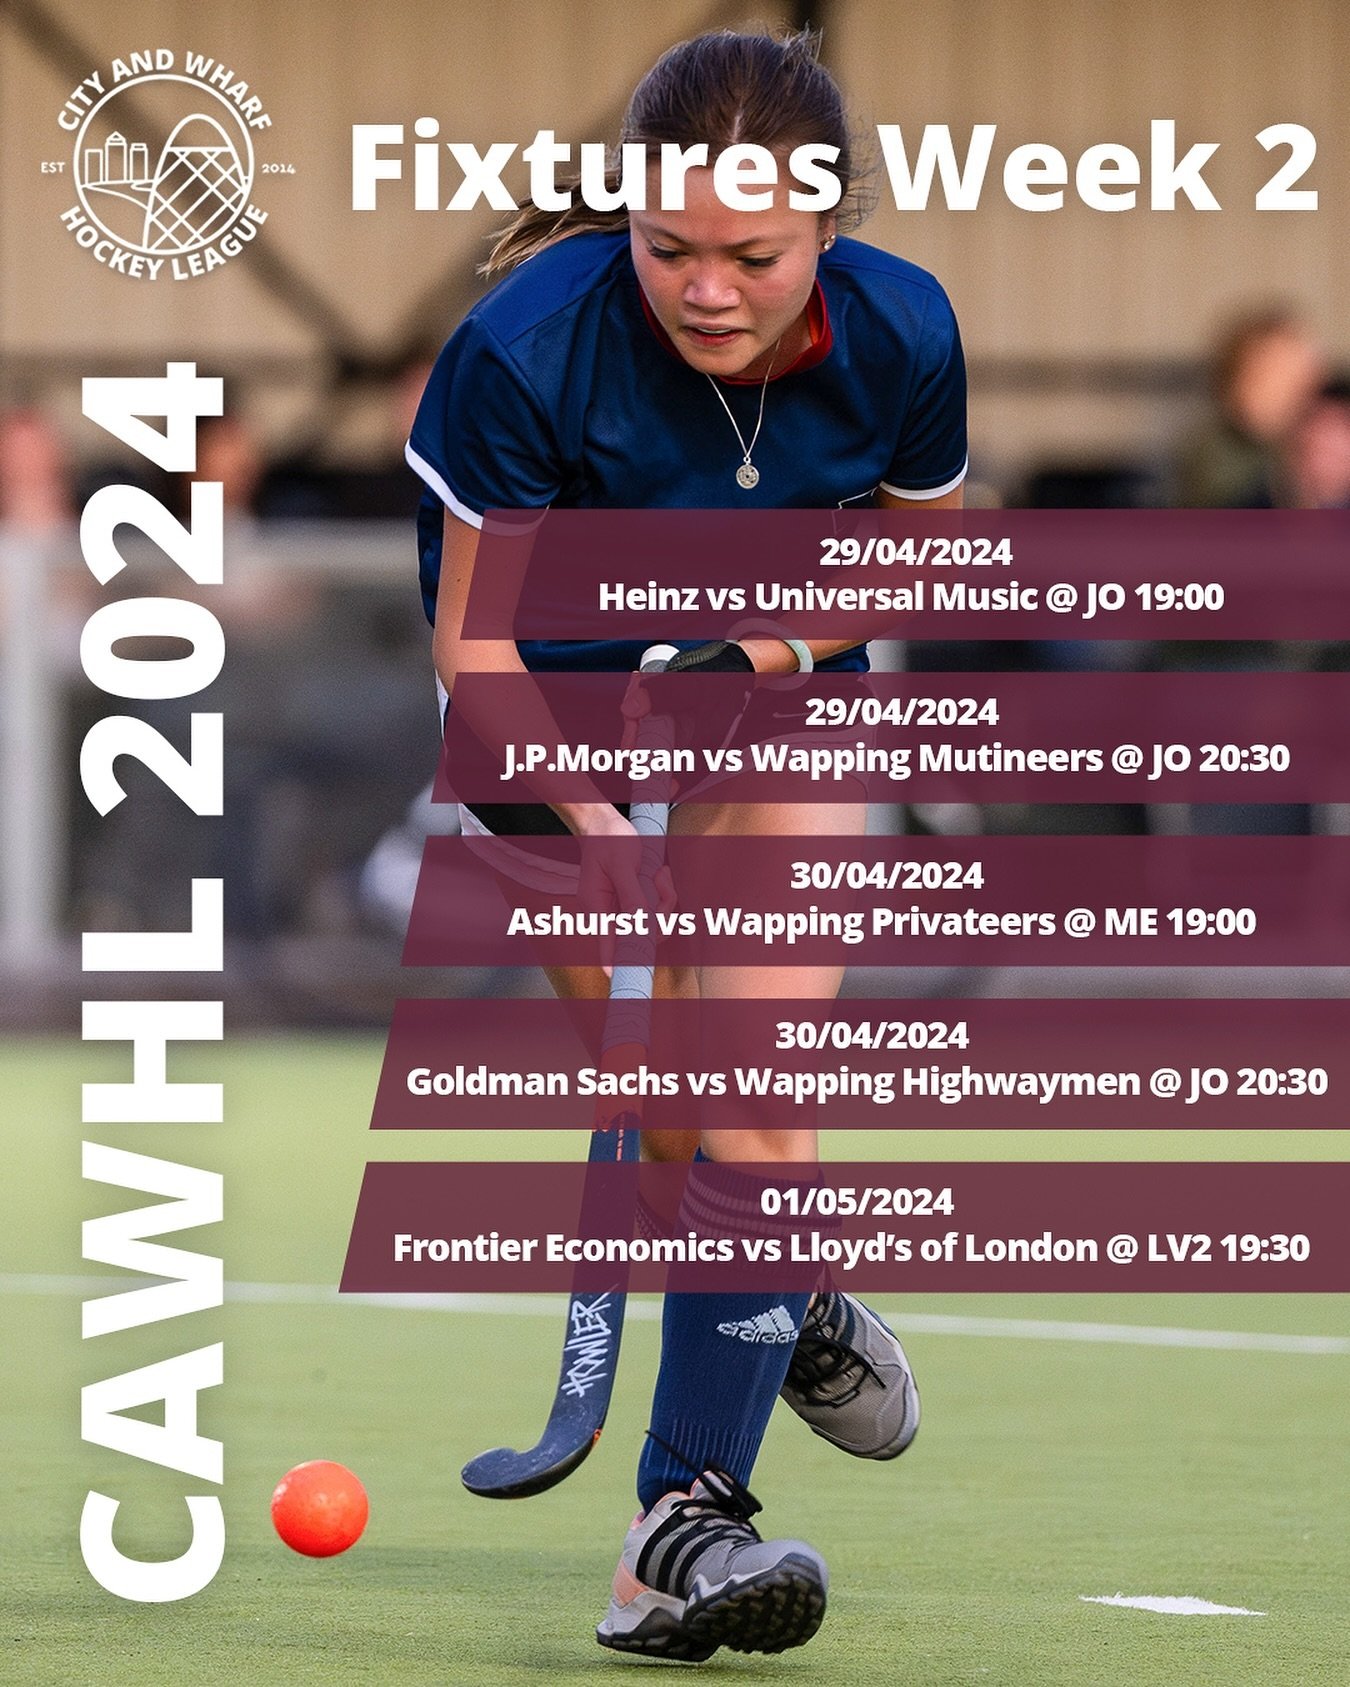 Week 2 Fixtures 🤩🏑

With the weather turning a little warmer for these matches 🤞🌆

#fieldhockey #hockey #citywharfhockey #londonhockey #londonhockeyleague #englandhockey #gbhockey #mixedhockey #corporateleague #corporate #londonsport #hockeytime 